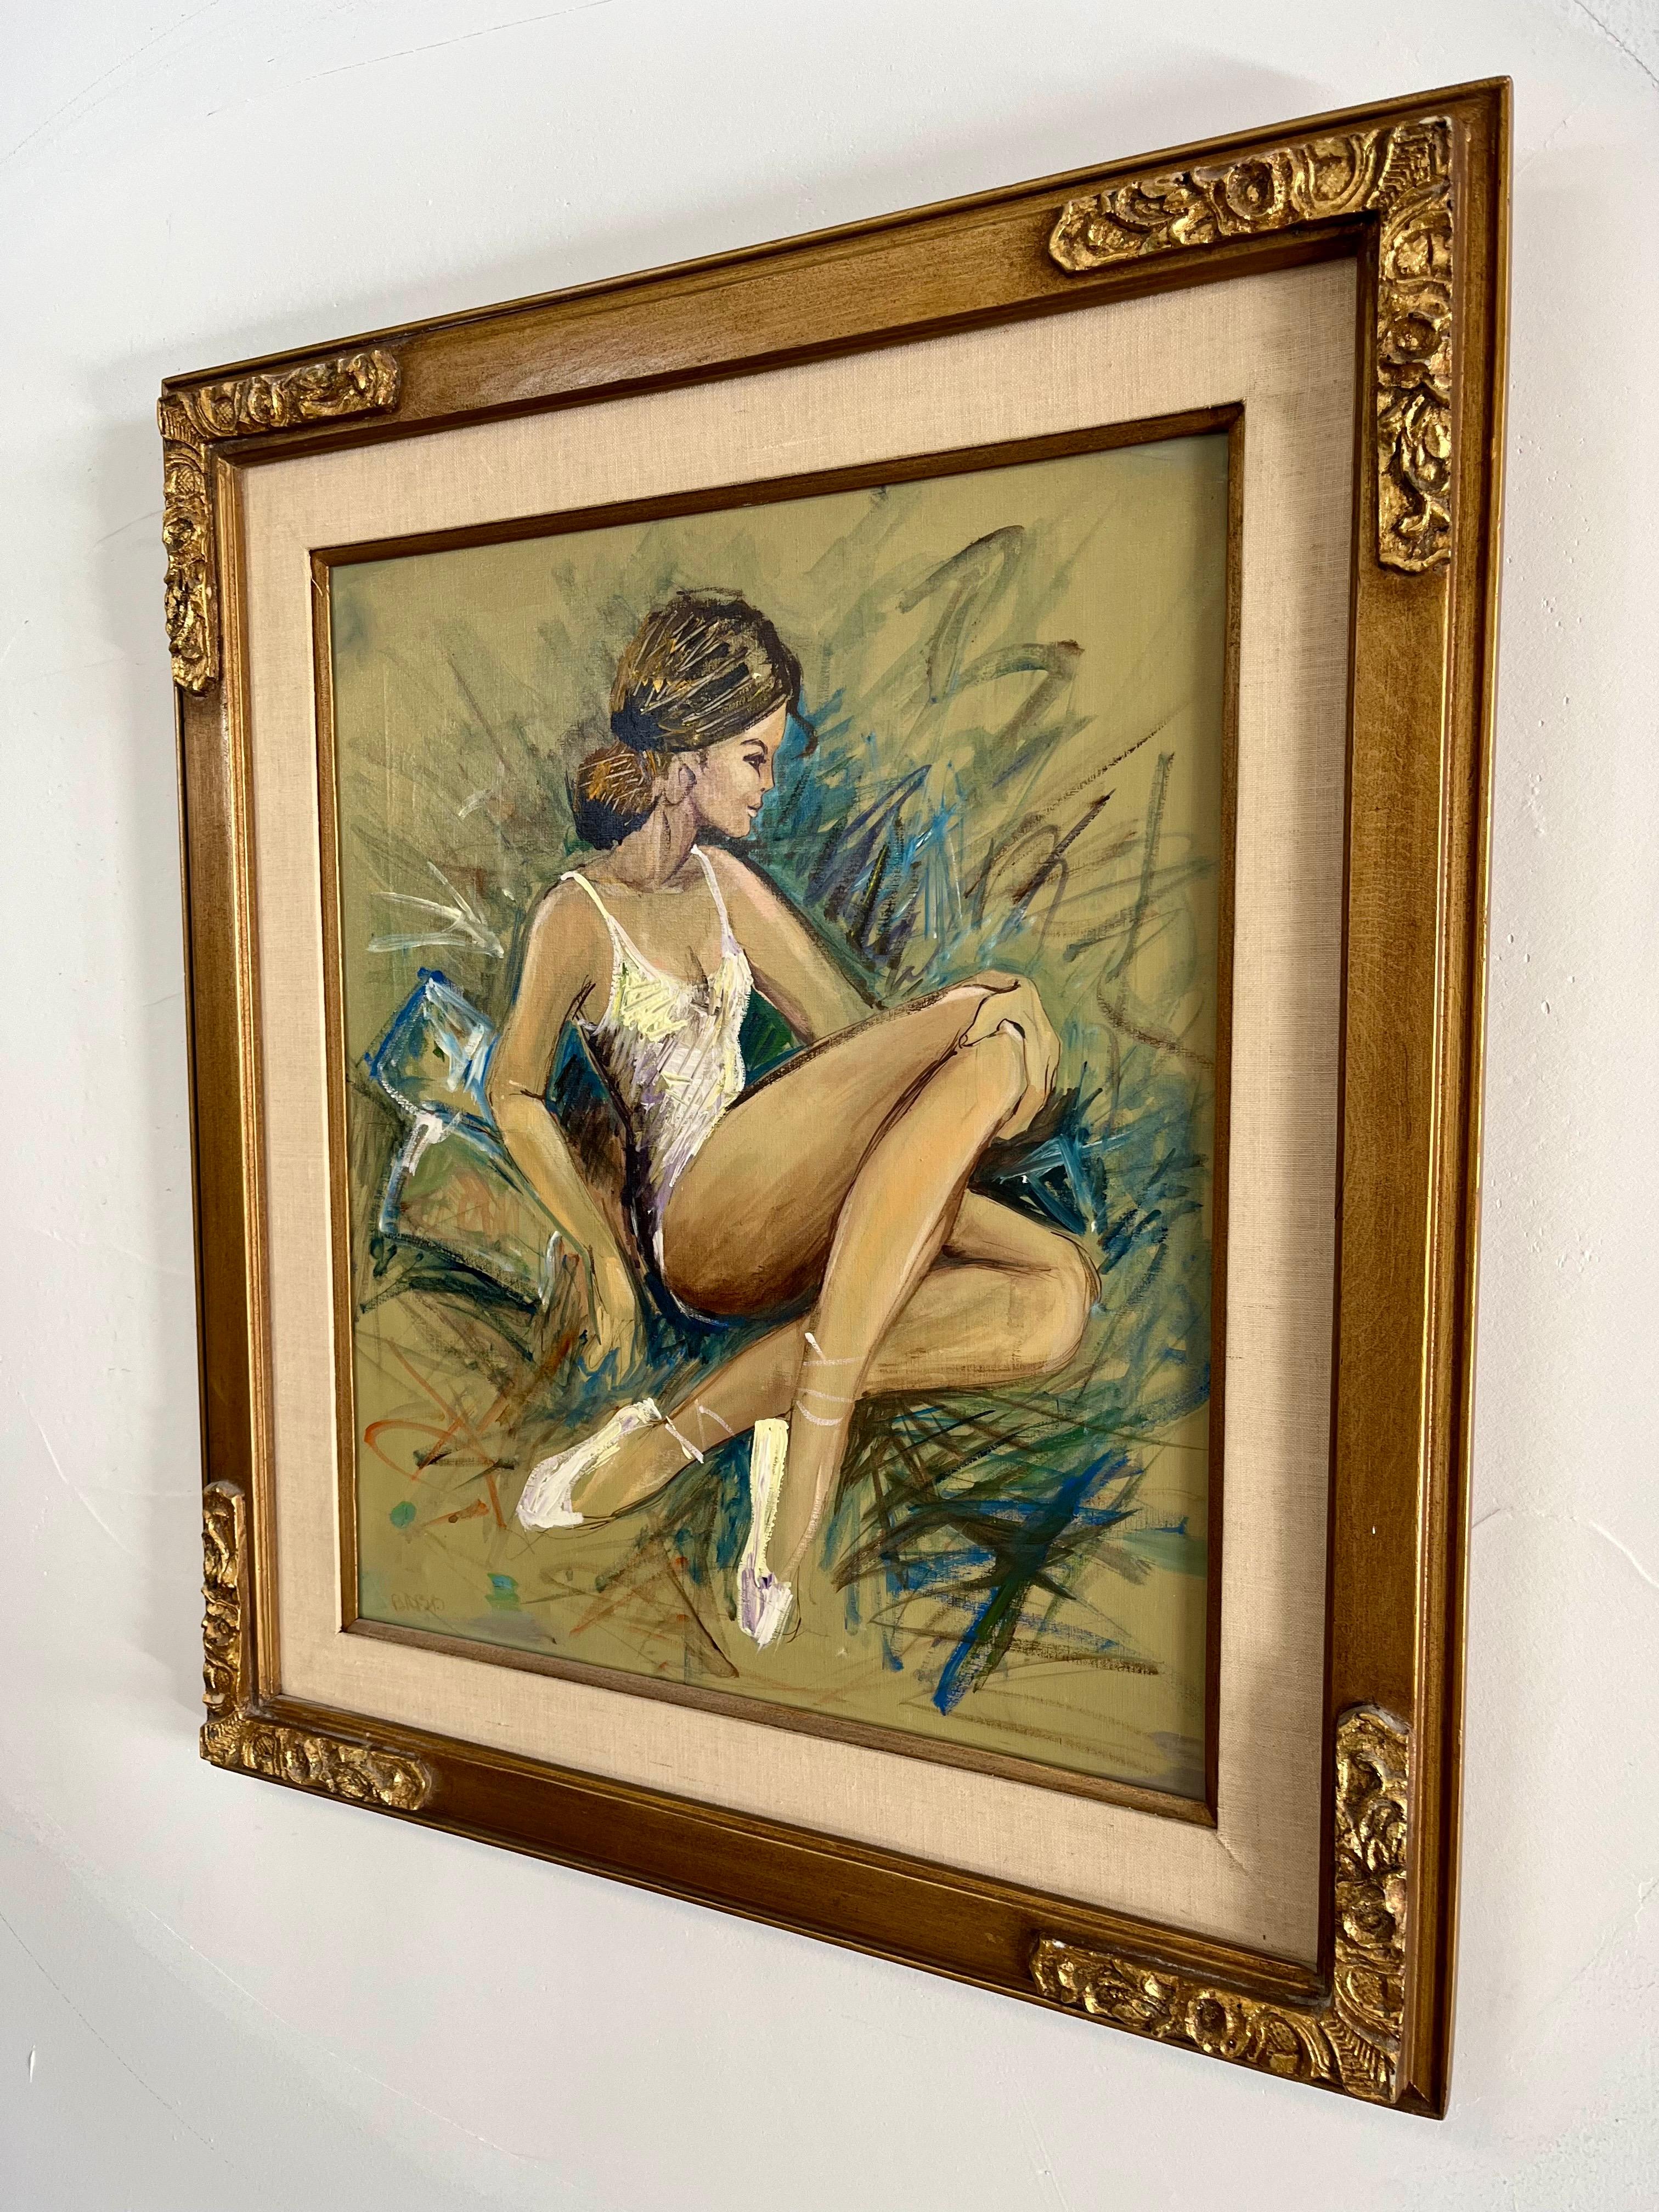 A very beautiful and engaging signed original Mid-Century Modern Impressionistic oil on canvas painting of a serene ballerina caught in a moment of quiet contemplation. Exquisitely hand-painted and colored (with striking greens, yellows, blues,